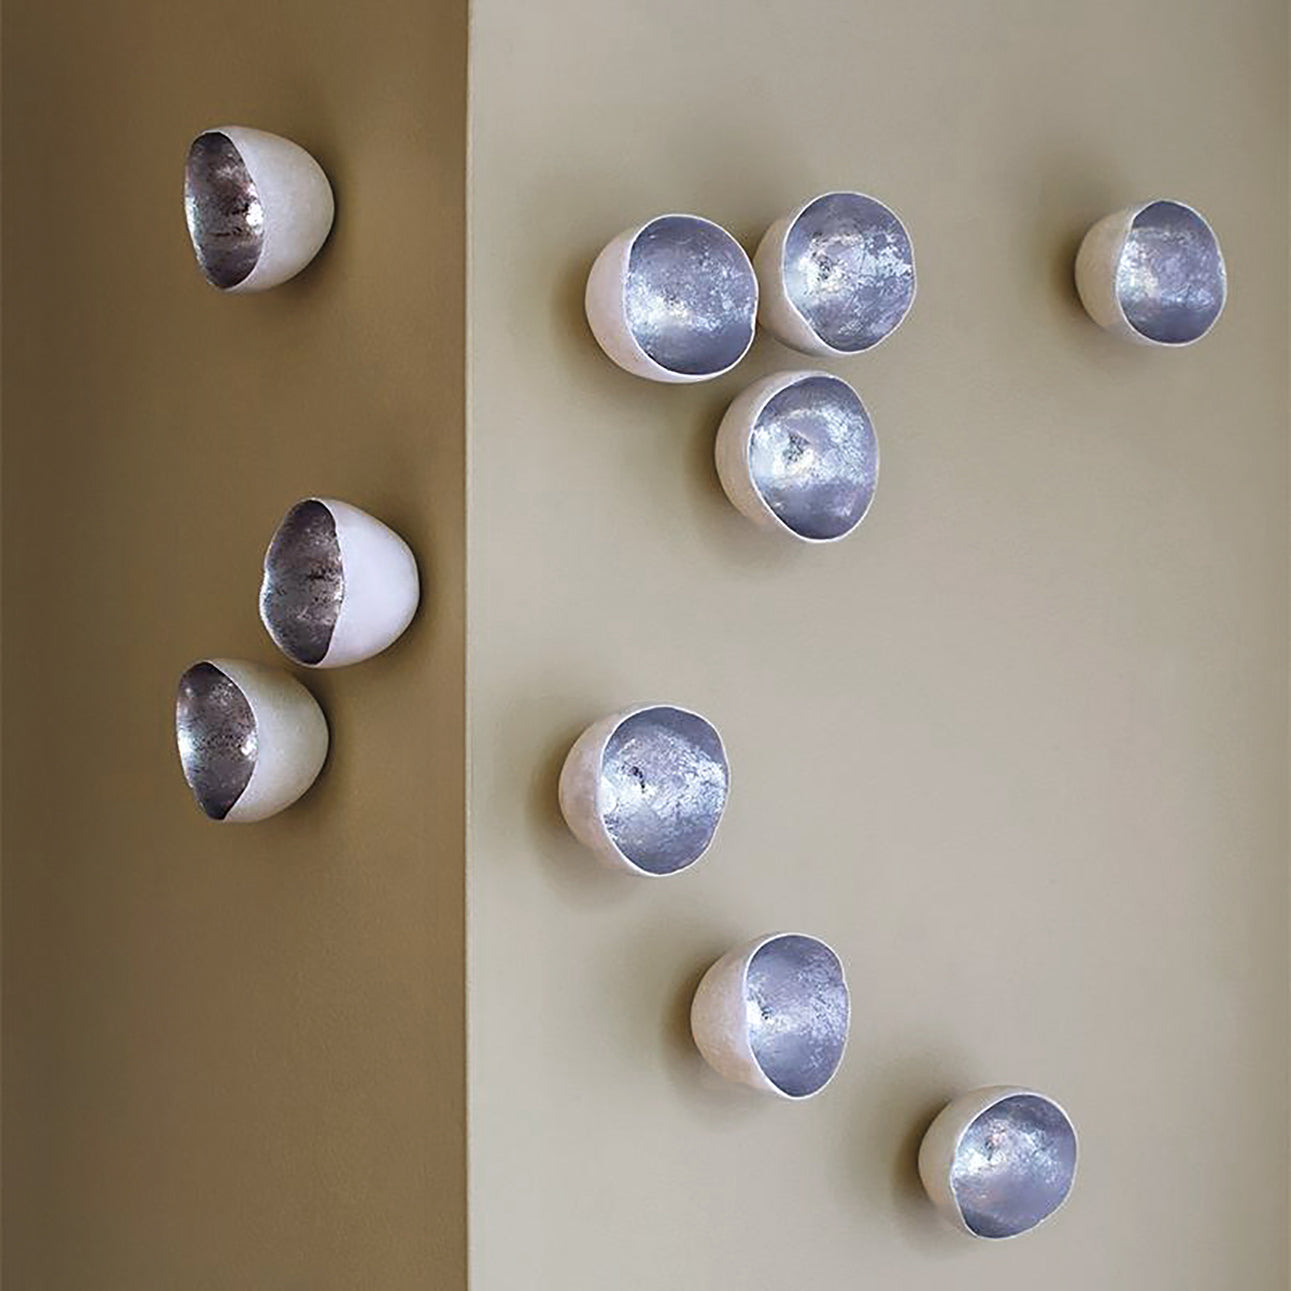 Seed Wall Play™ Silver Foil